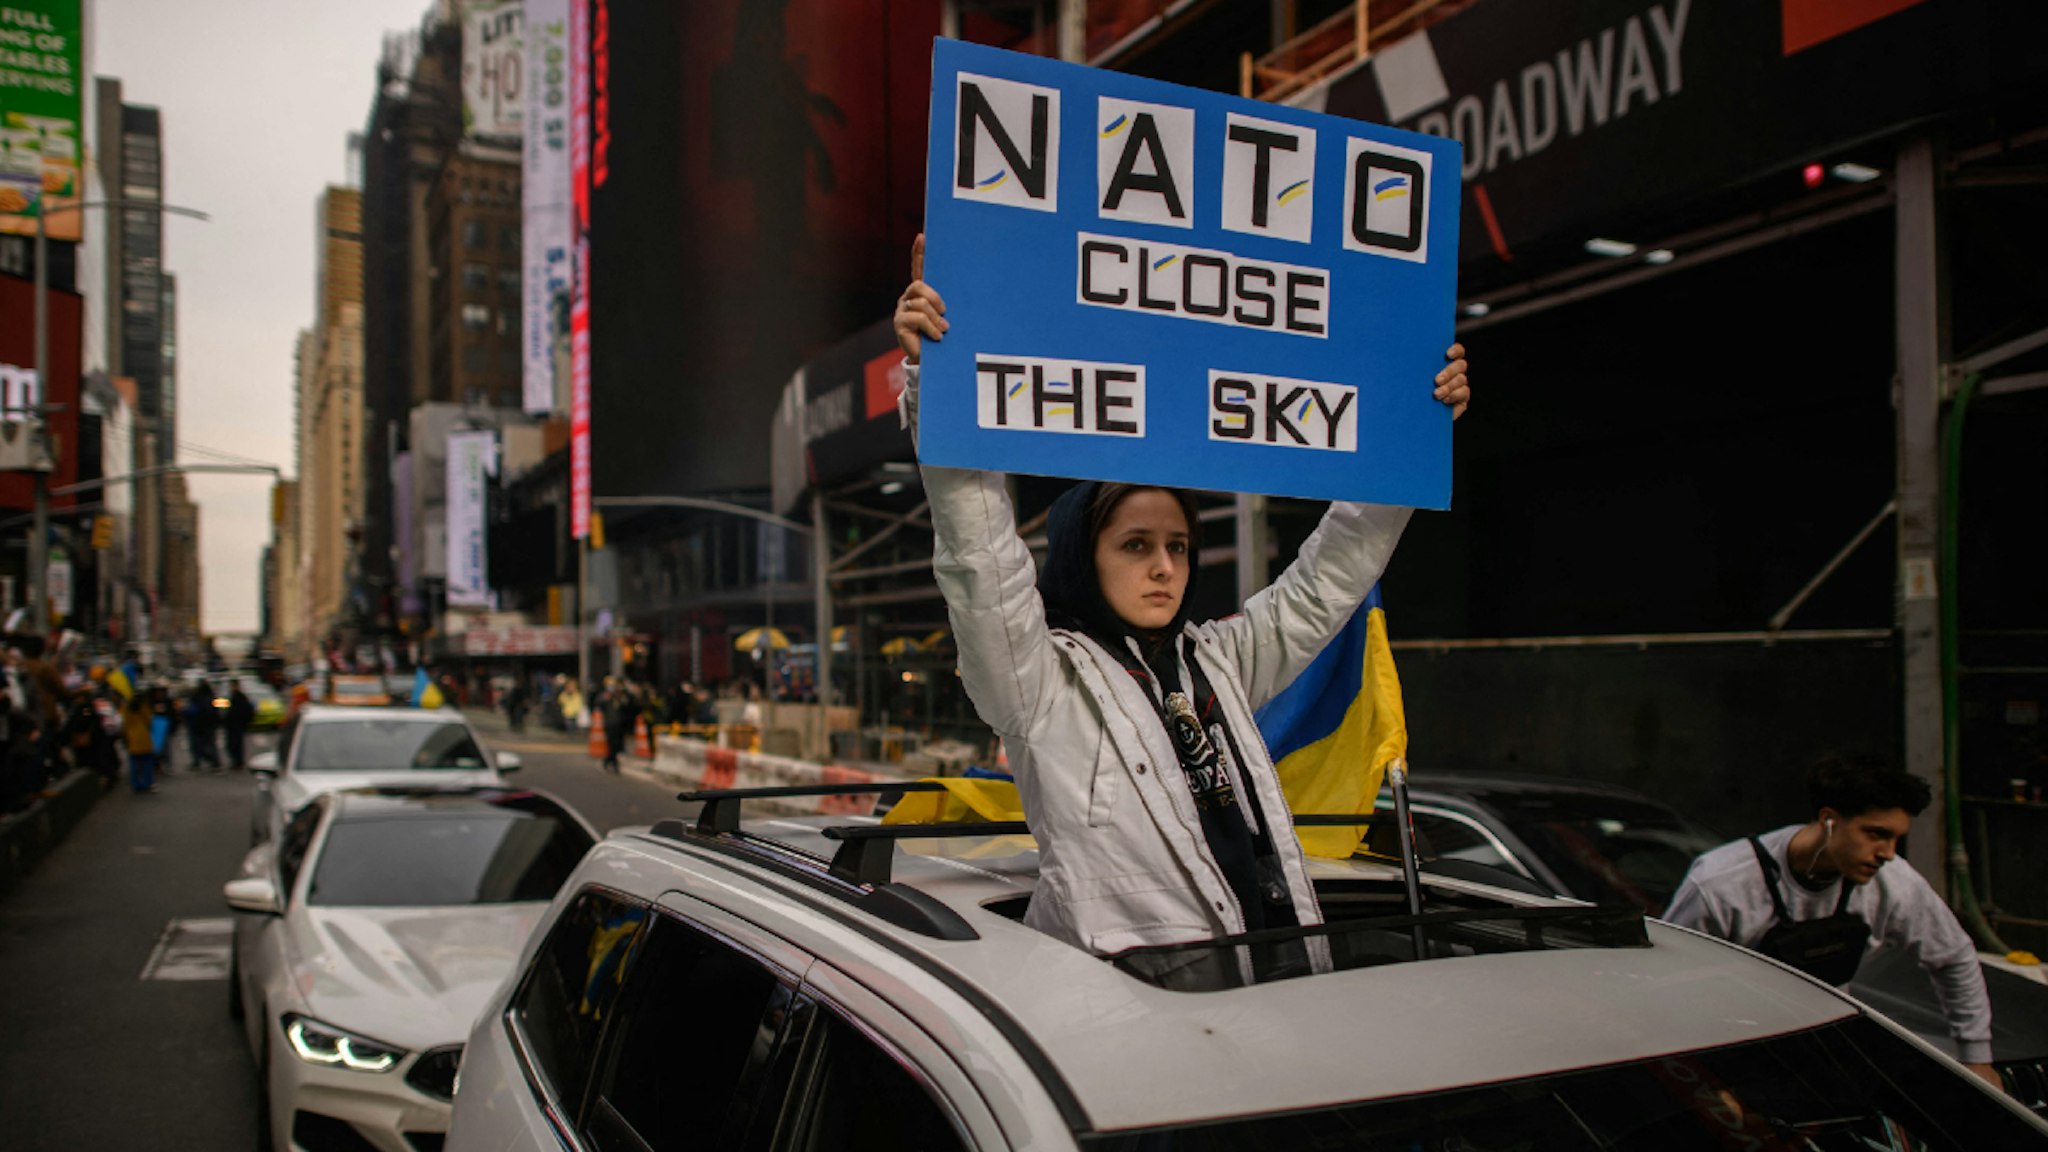 Members and supporters of the Ukrainian community attend a protest against the Russian invasion and call for a no-fly zone, in Times Square, New York, on March 5, 2022.